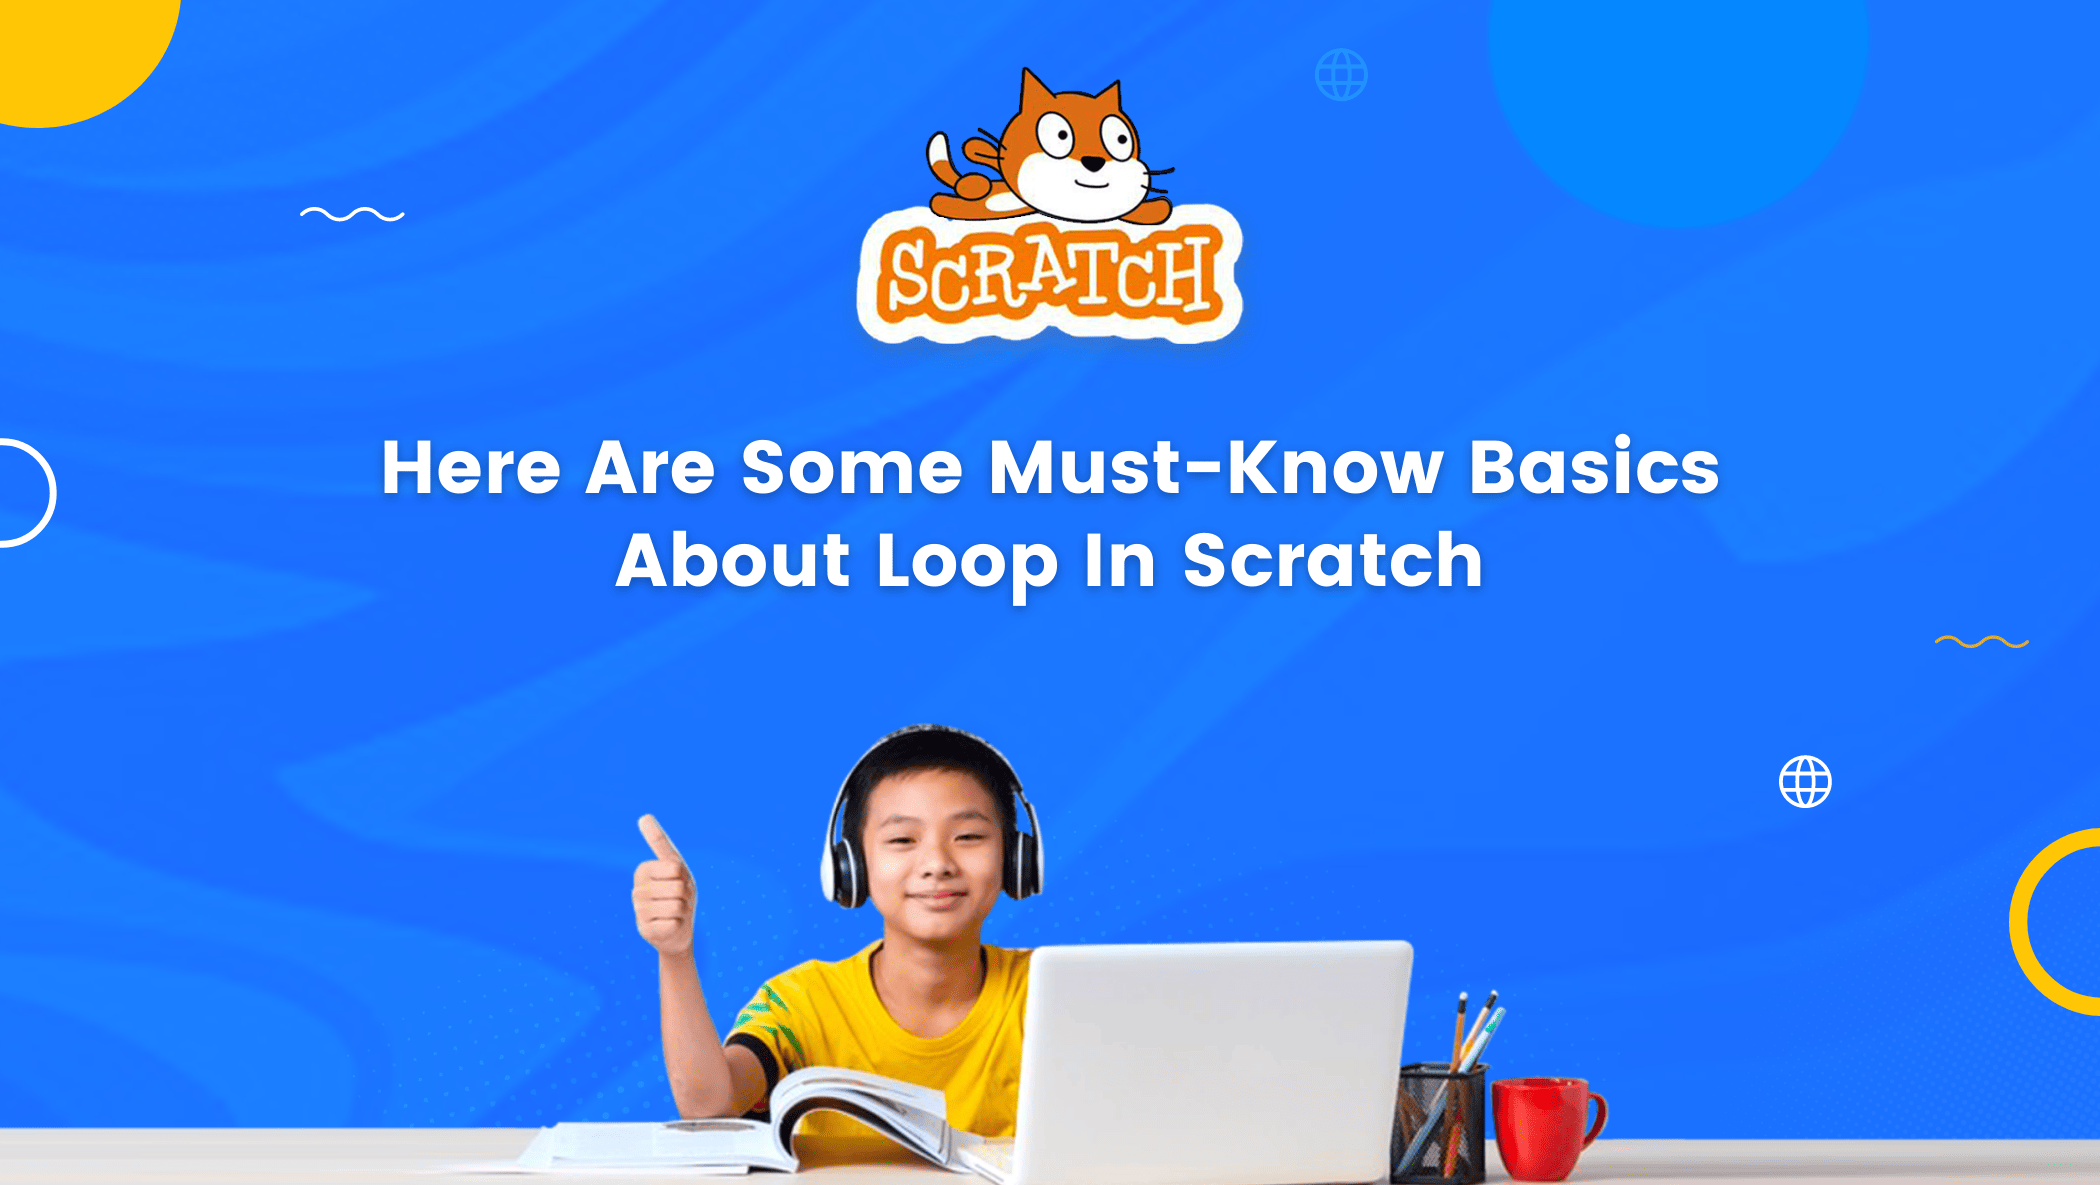 Here Are Some Must-Know Basics About Loop In Scratch